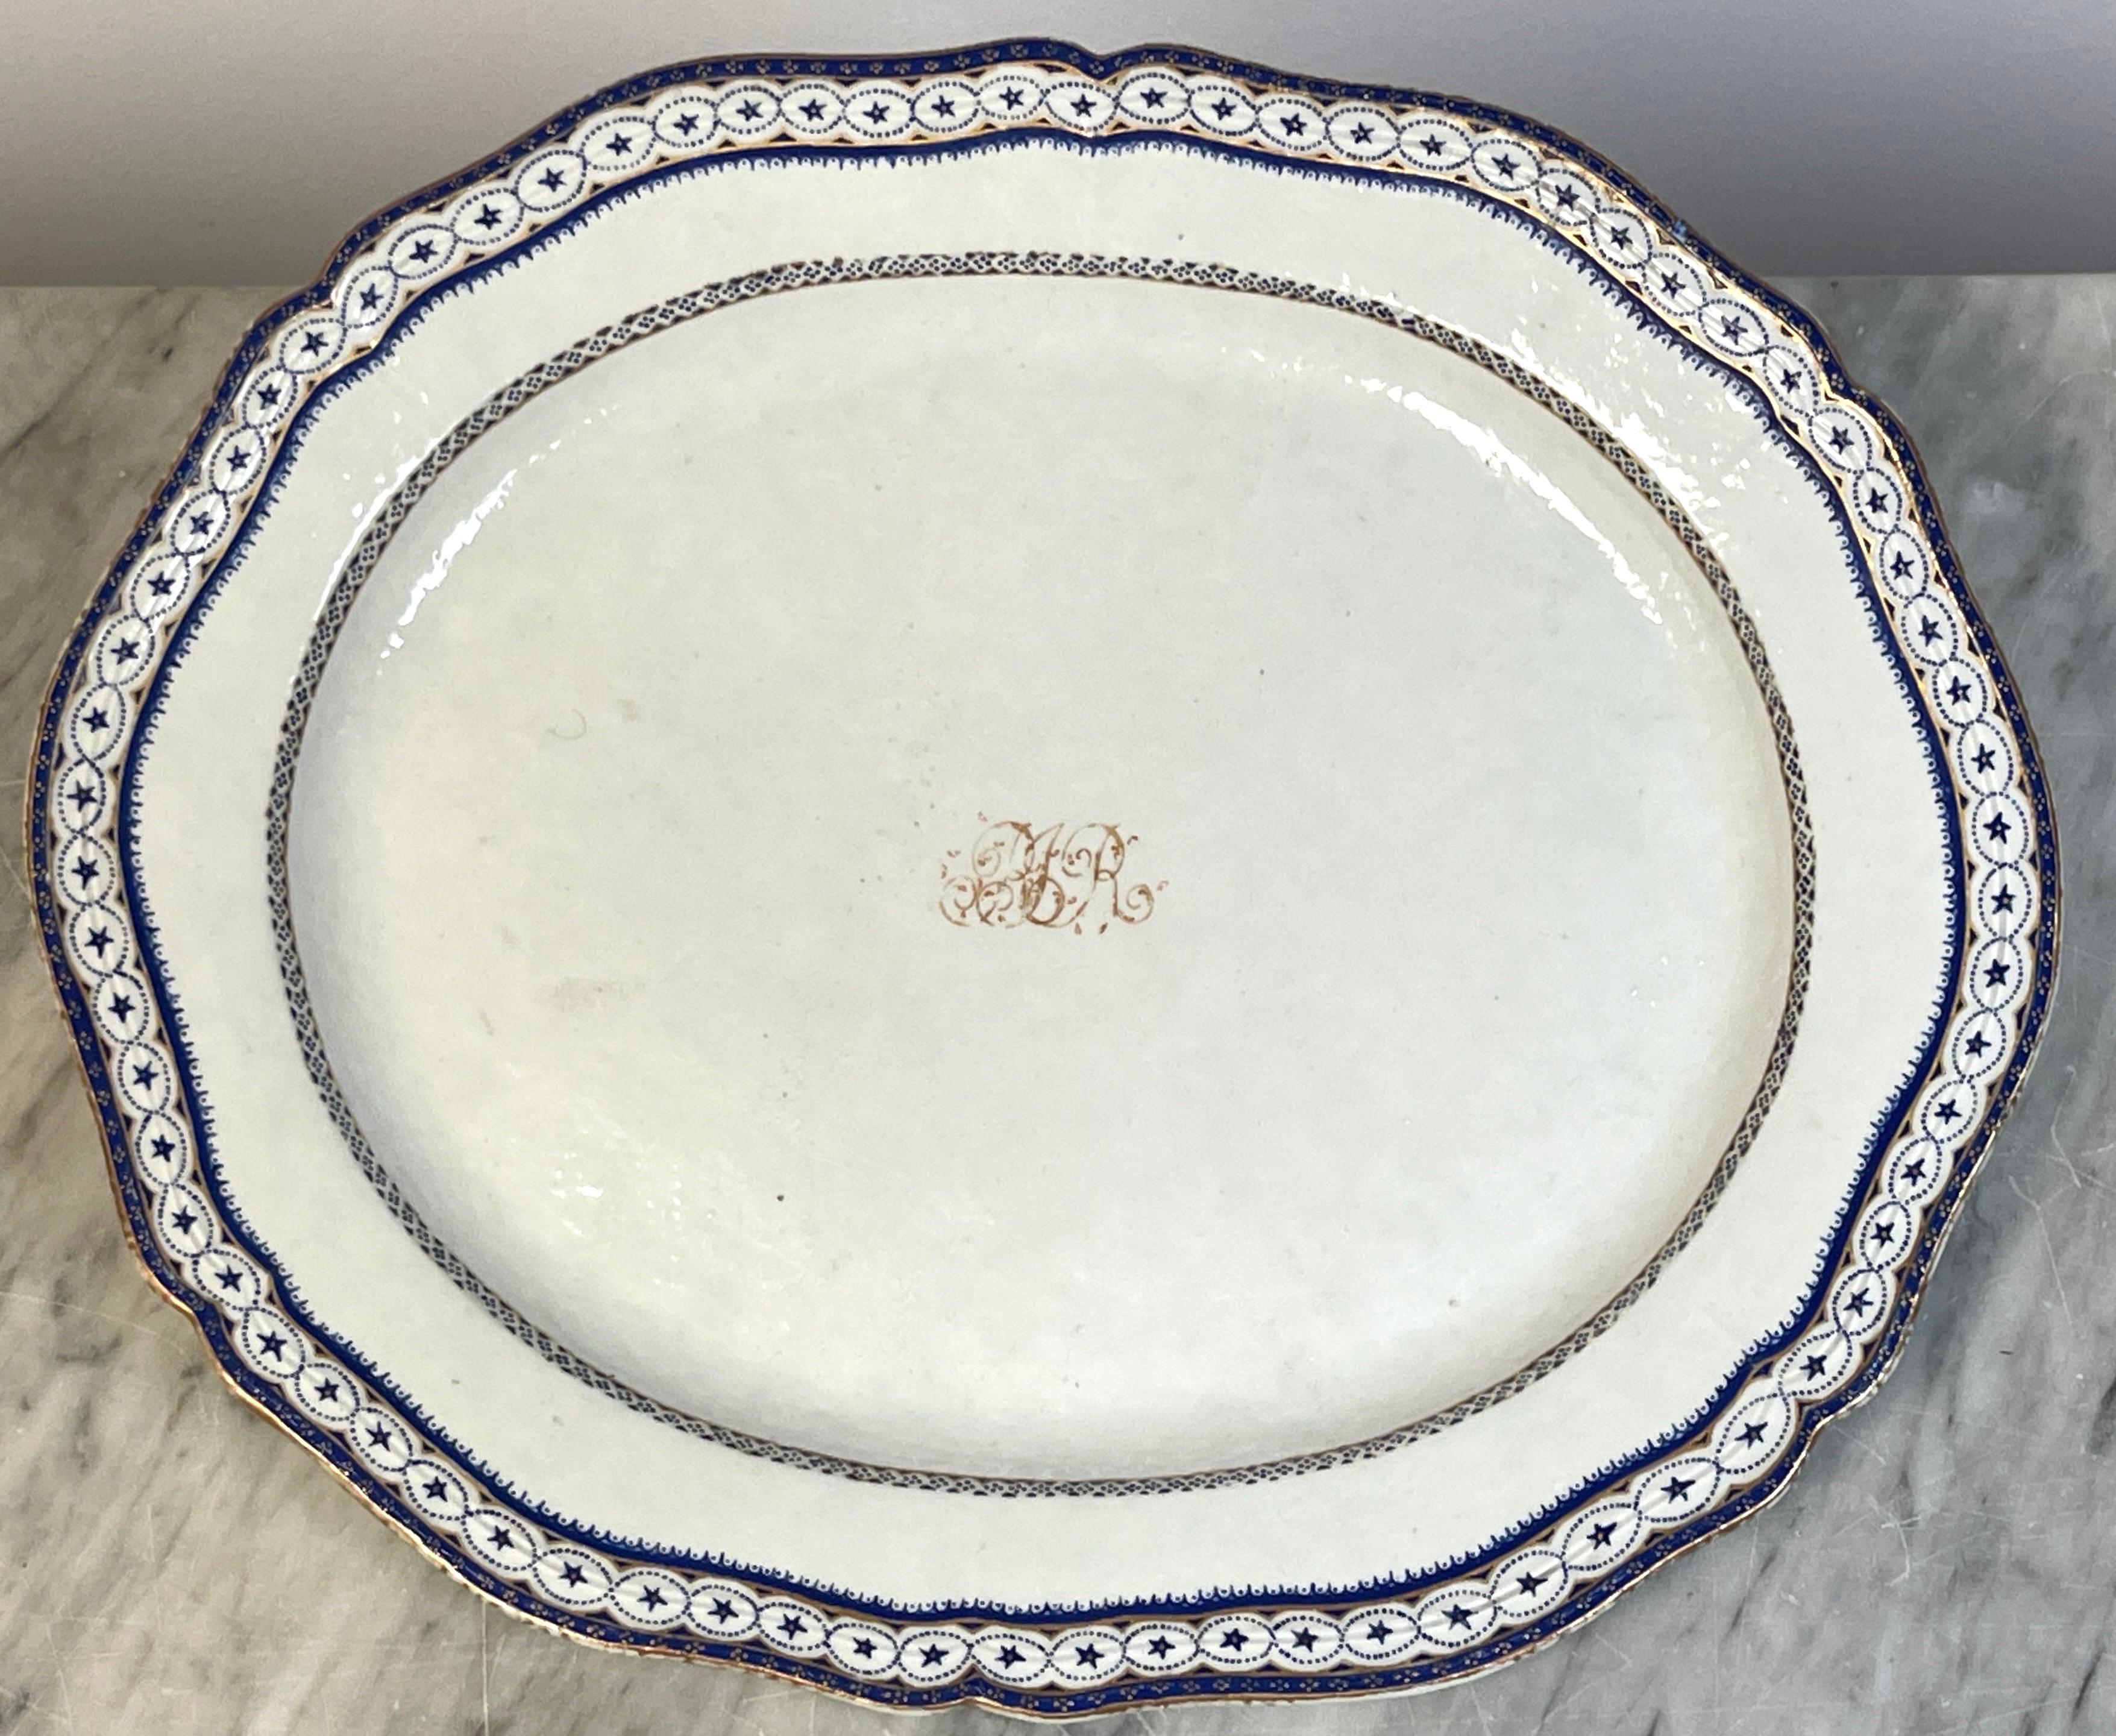 Chinese Export American market, blue & white 'star' boarder armorial platters 
China for American Market, Circa 1790s

A rare and unique example of Chinese Famille-Verte porcelain, made for the American Market. This scalloped platter of a fine